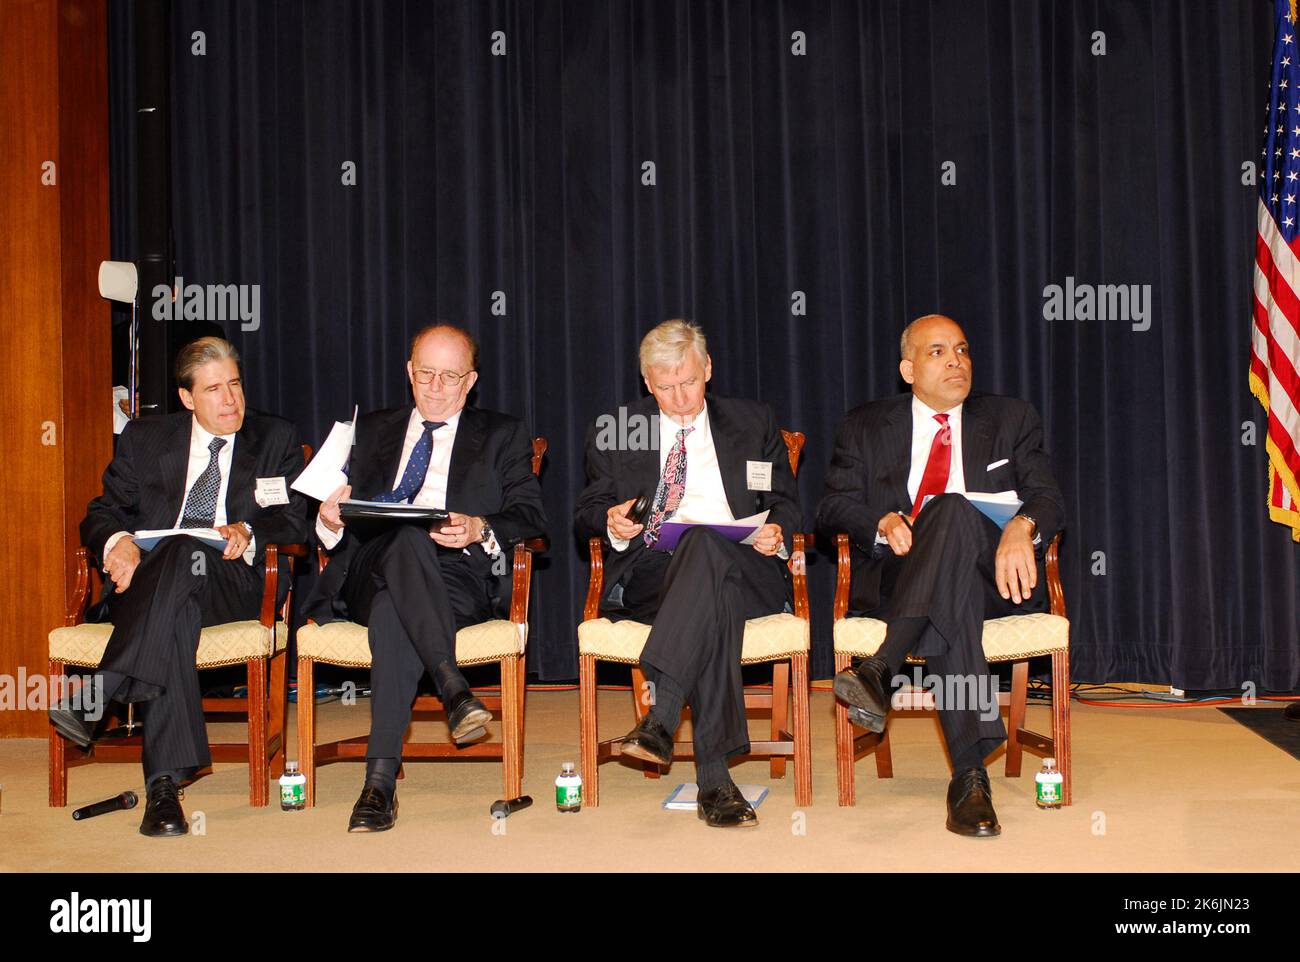 Summit on Global Aging, in Dean Acheson Auditorium, where participants from government, universities, and the private sector discussed the effects of population aging on economic growth, labor force, trade, migration, international relations, and national security. Stock Photo